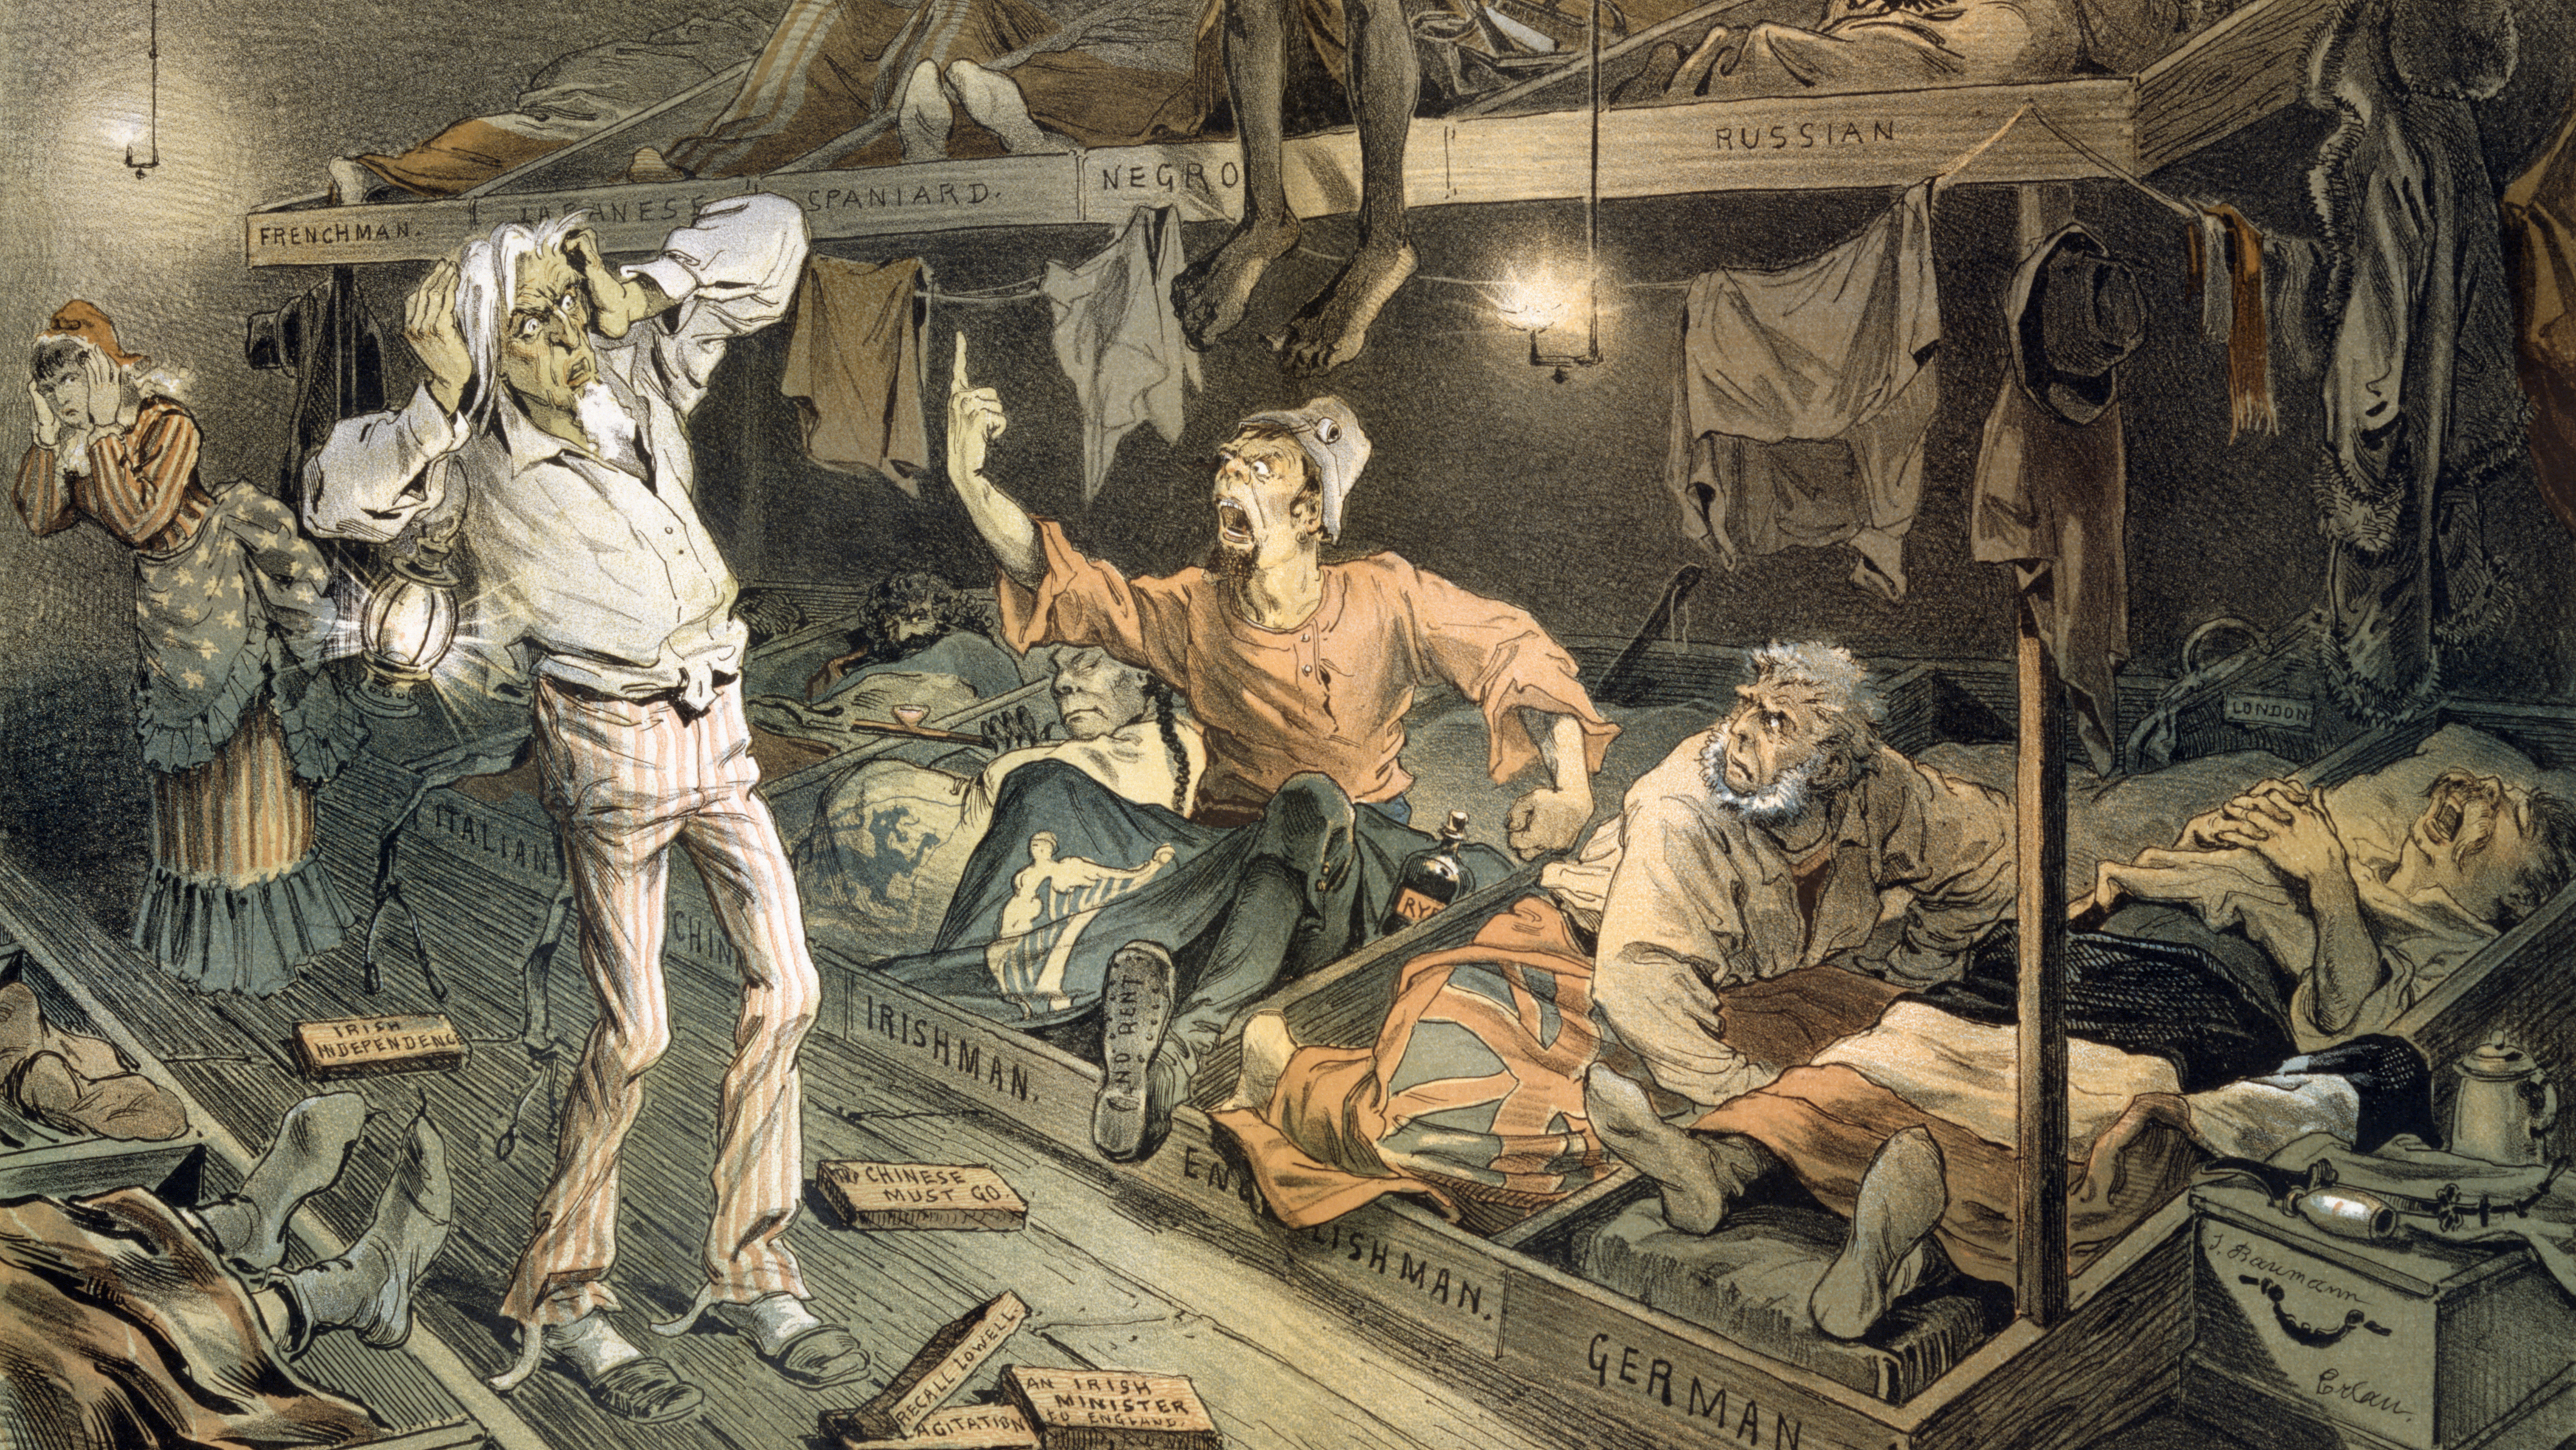 An 1882 cartoon print shows an Irishman confronting Uncle Sam in a boarding house filled with laborers.